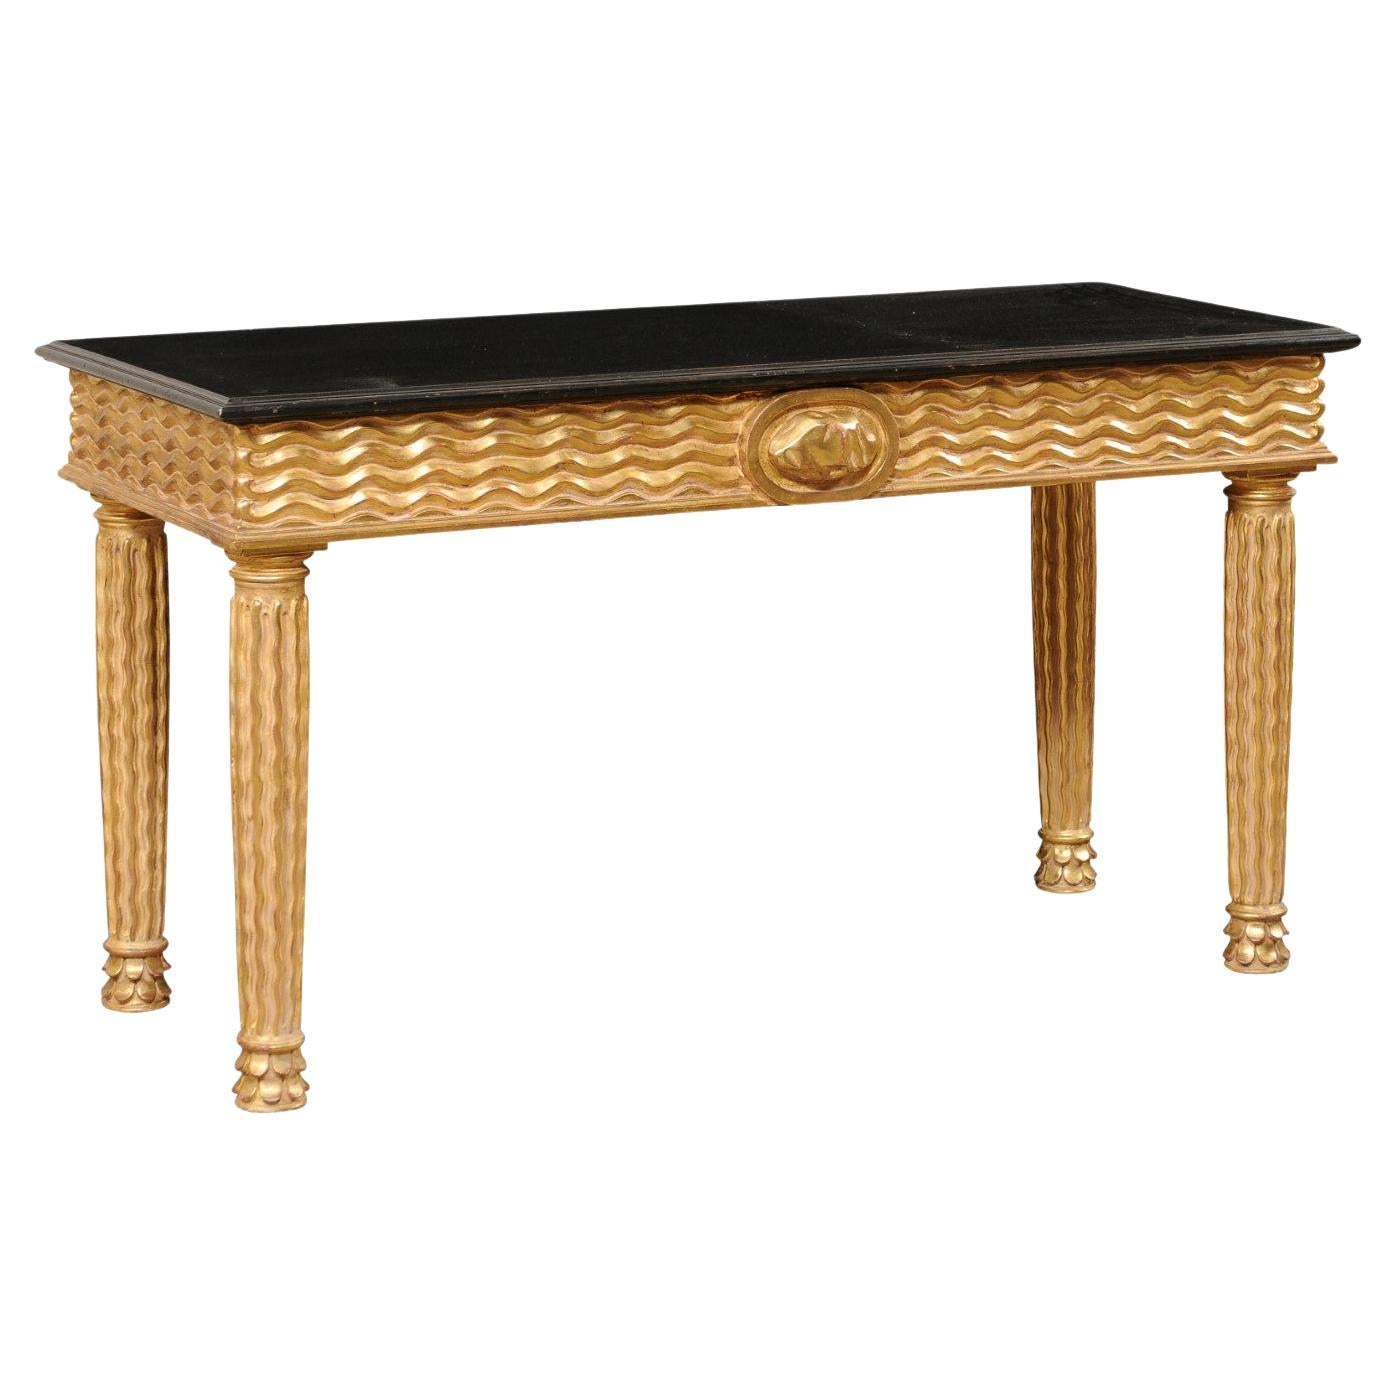 Italian Masterfully Hand-Carved Wooden Console Table with Real Gold Leafing For Sale